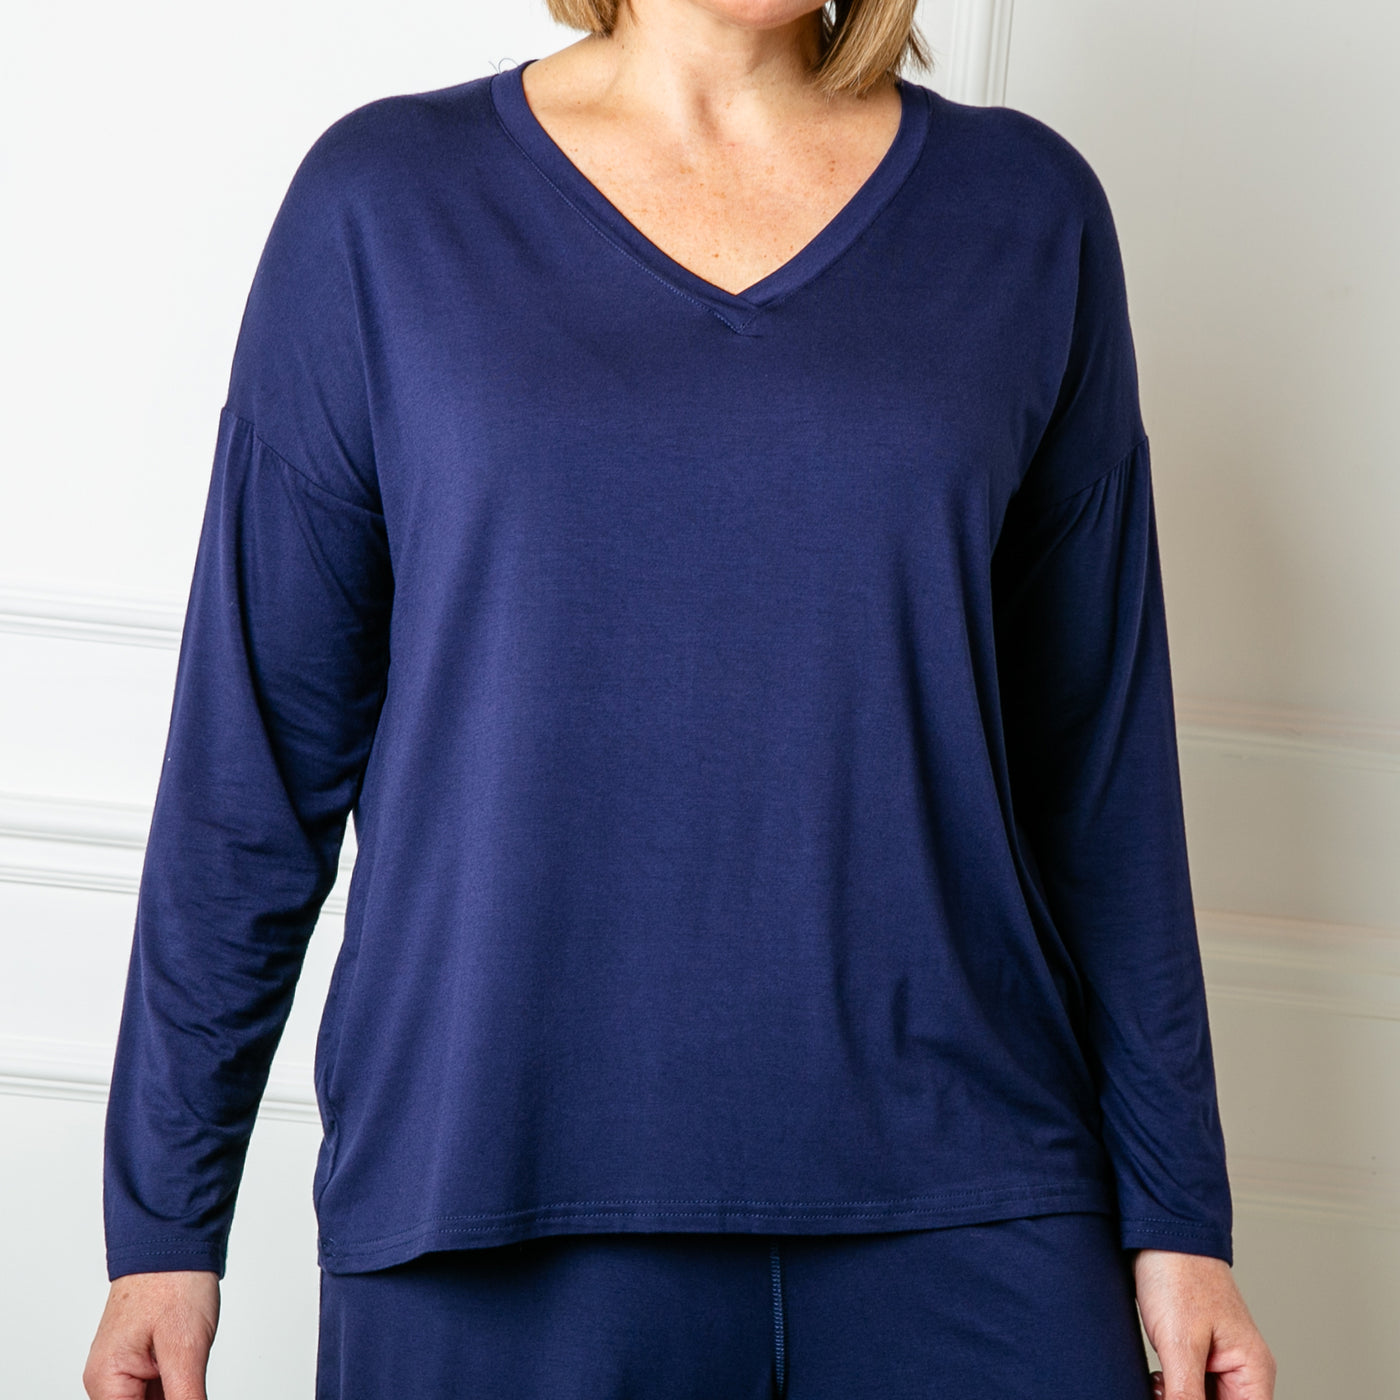 The navy blue Bamboo Long Sleeve Top with a v neckline for a flattering fit